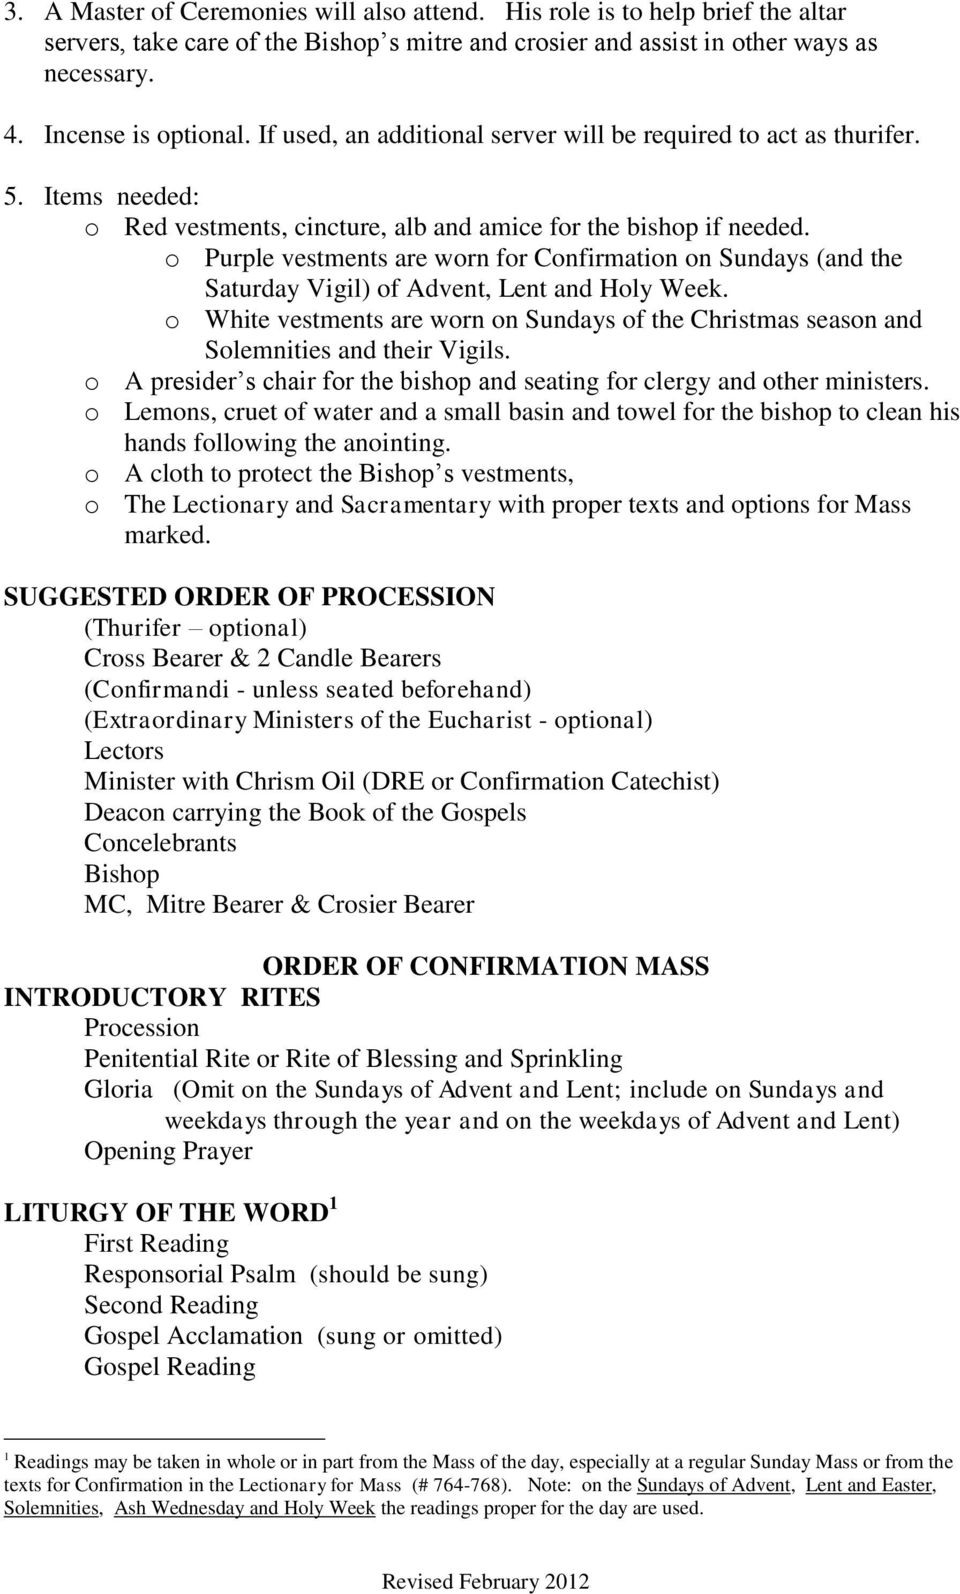 THE CONFIRMATION LITURGY 11. Overview 11. Practical Matters 11. Order In Order Of The Mass Worksheet